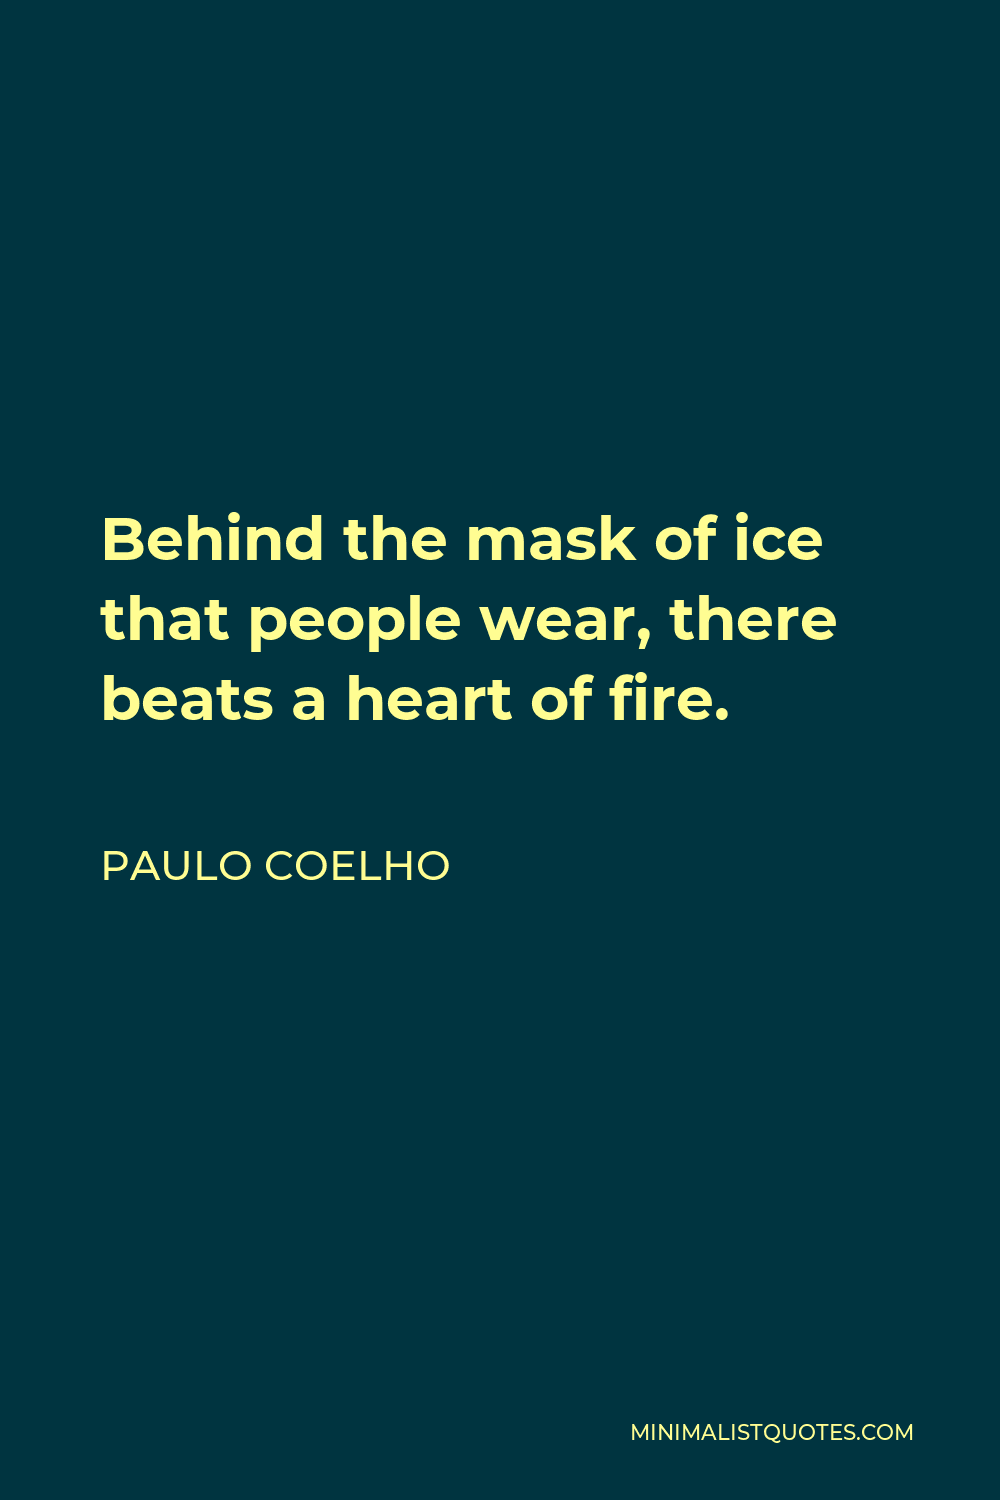 Paulo Coelho Quote - Behind the mask of ice that people wear, there beats a heart of fire.